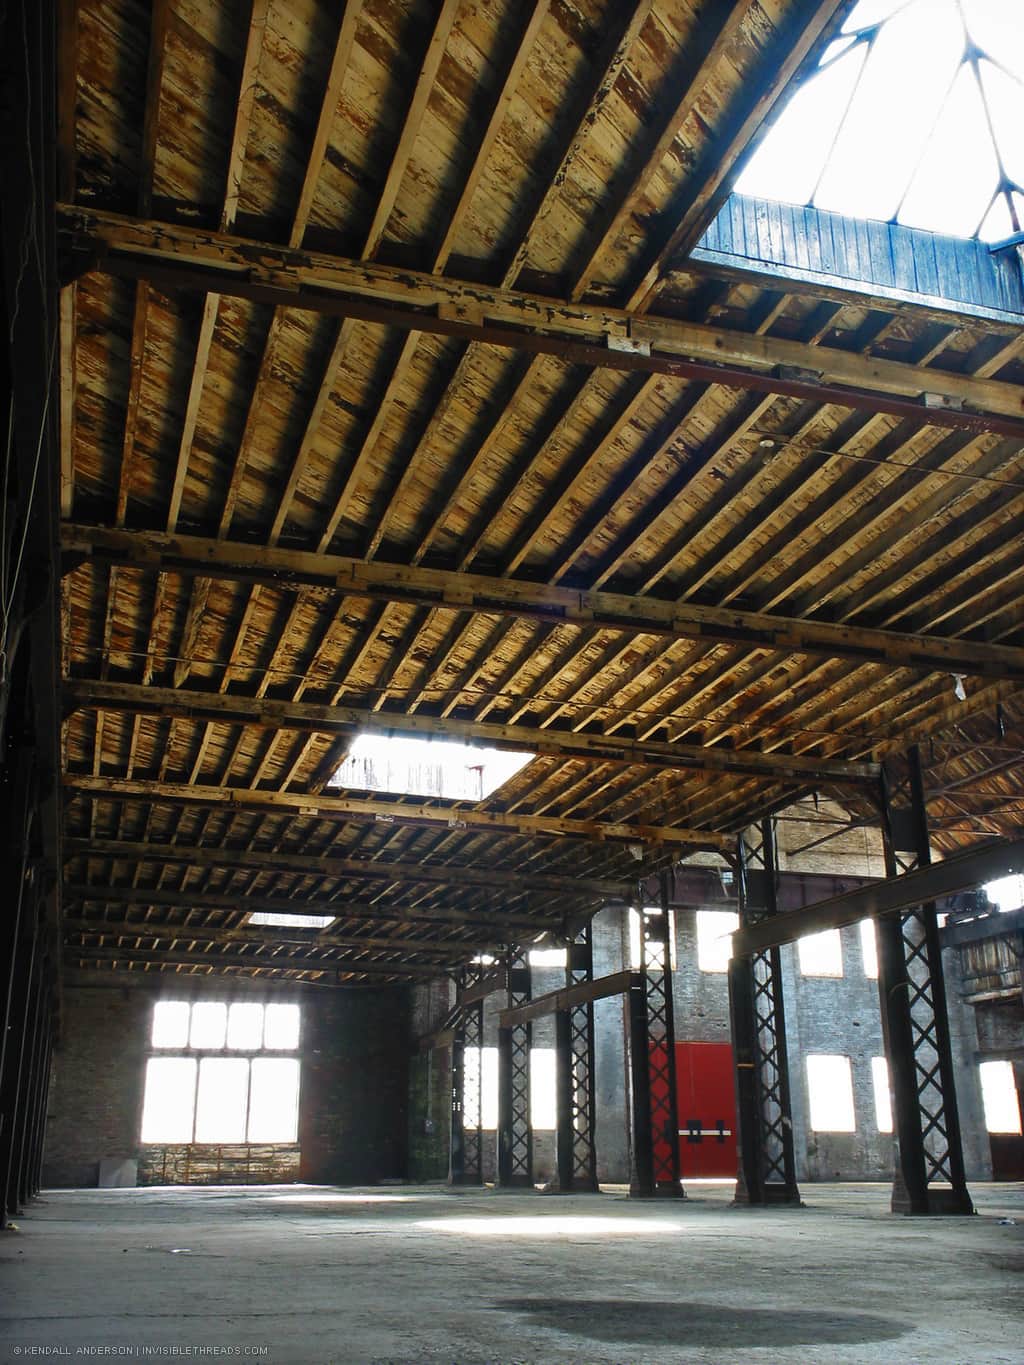 Wood joists holding up ceiling of industrial warehouse, with skylights